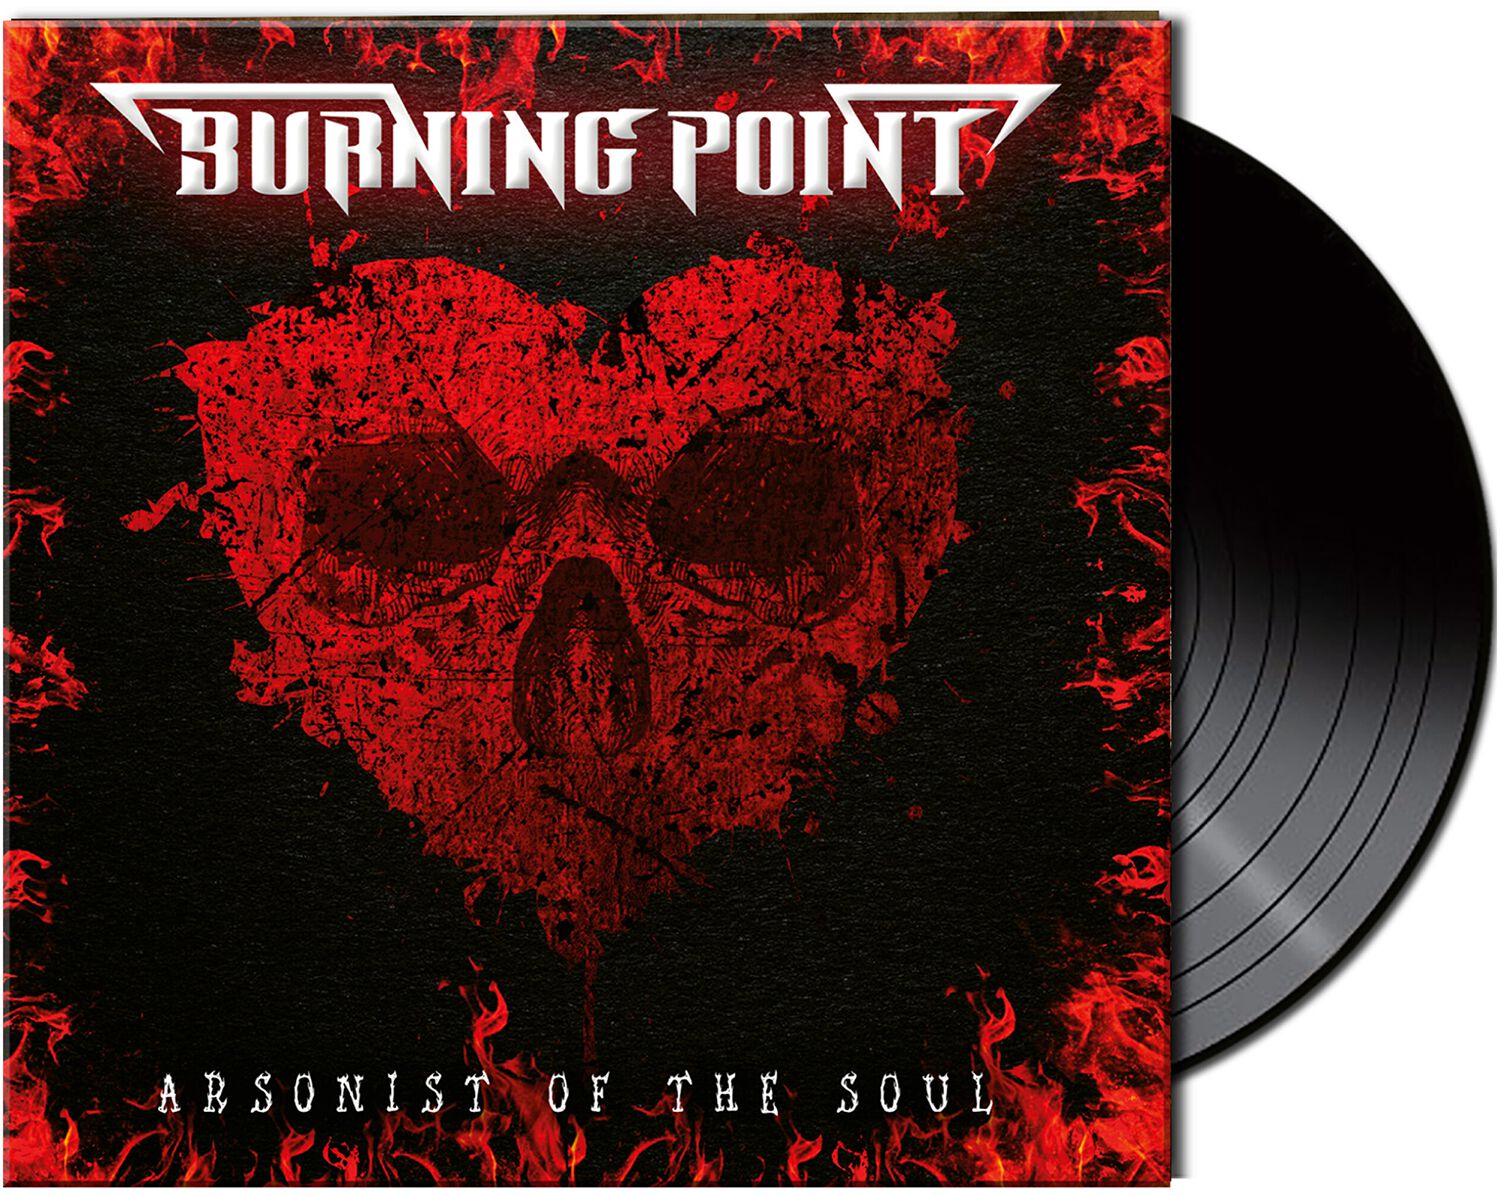 Image of Burning Point Arsonist of the soul LP schwarz